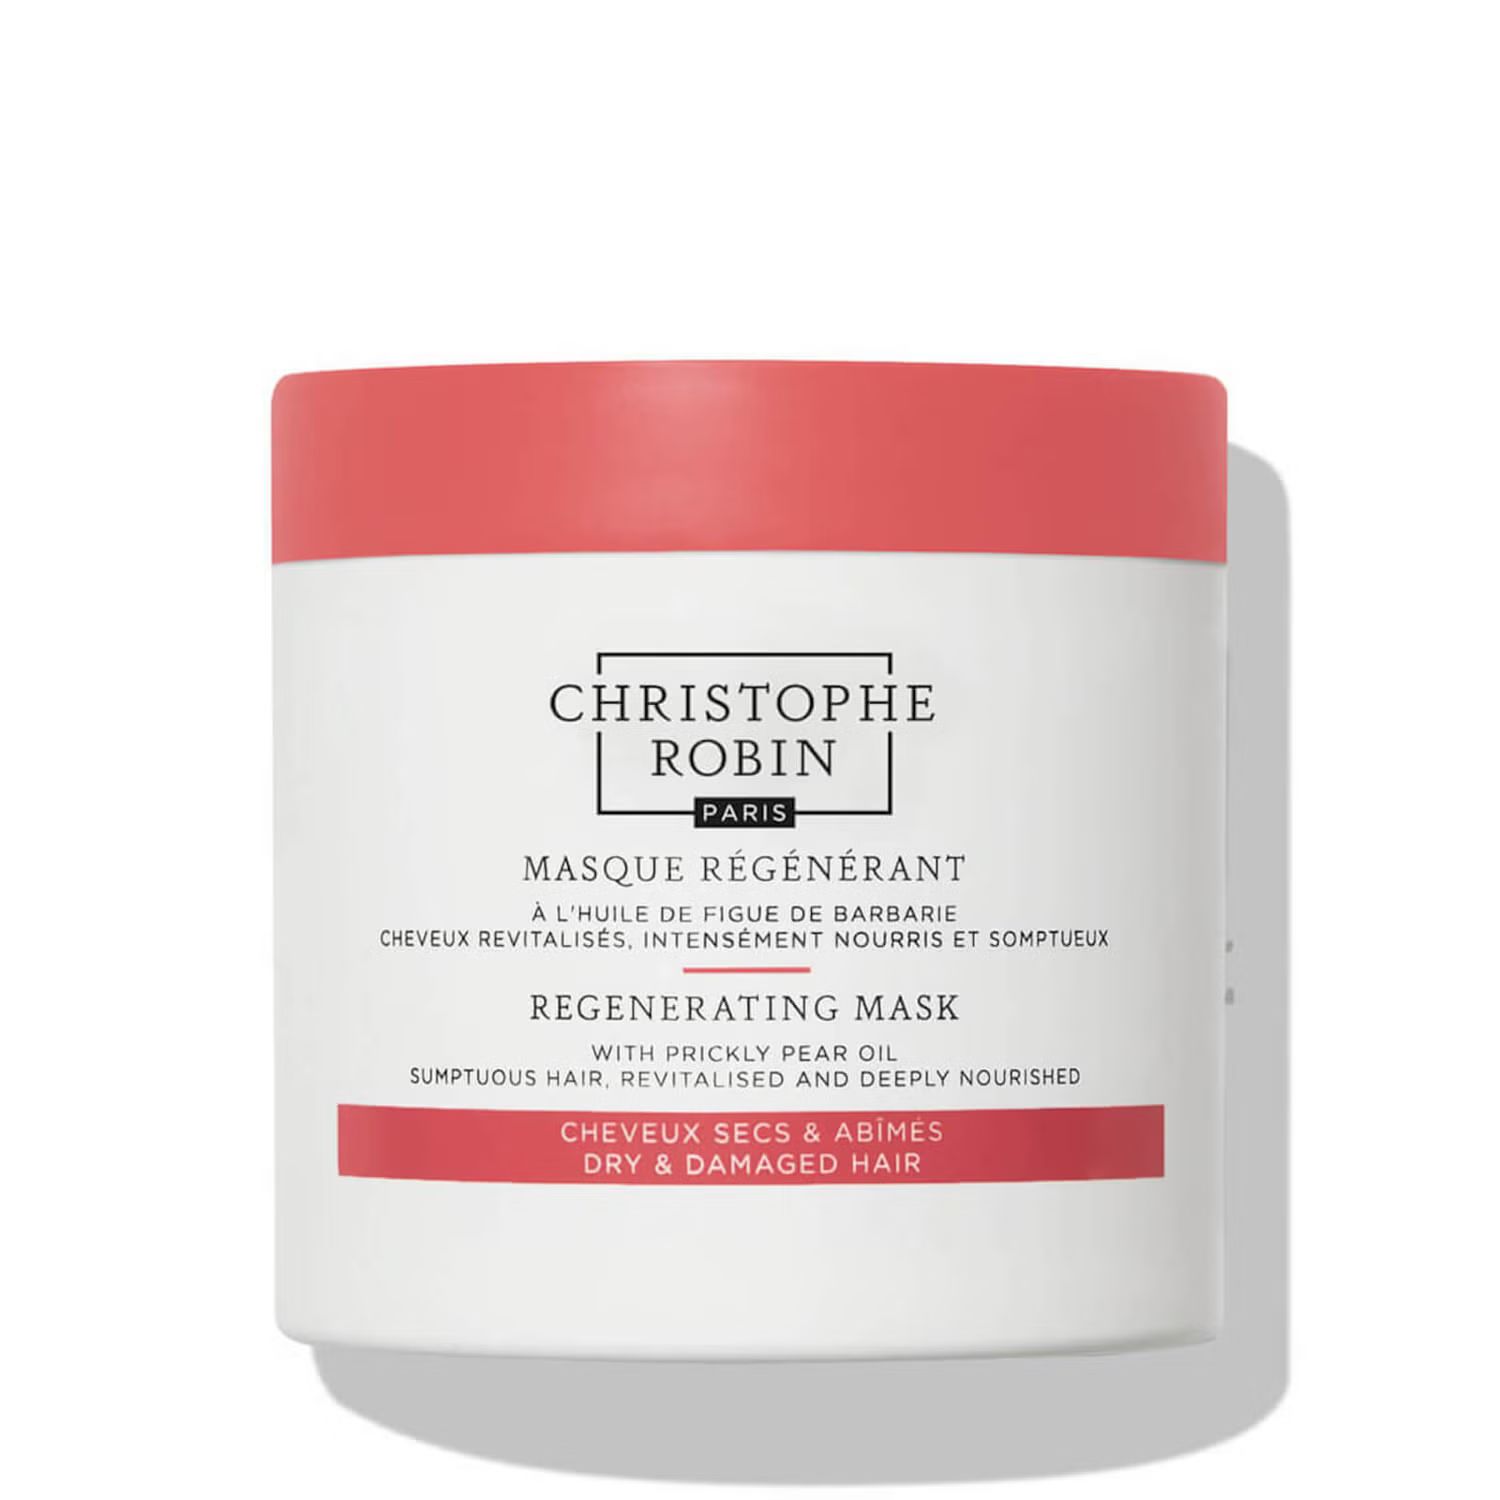 Regenerating Mask with Prickly Pear Oil | Christophe Robin UK